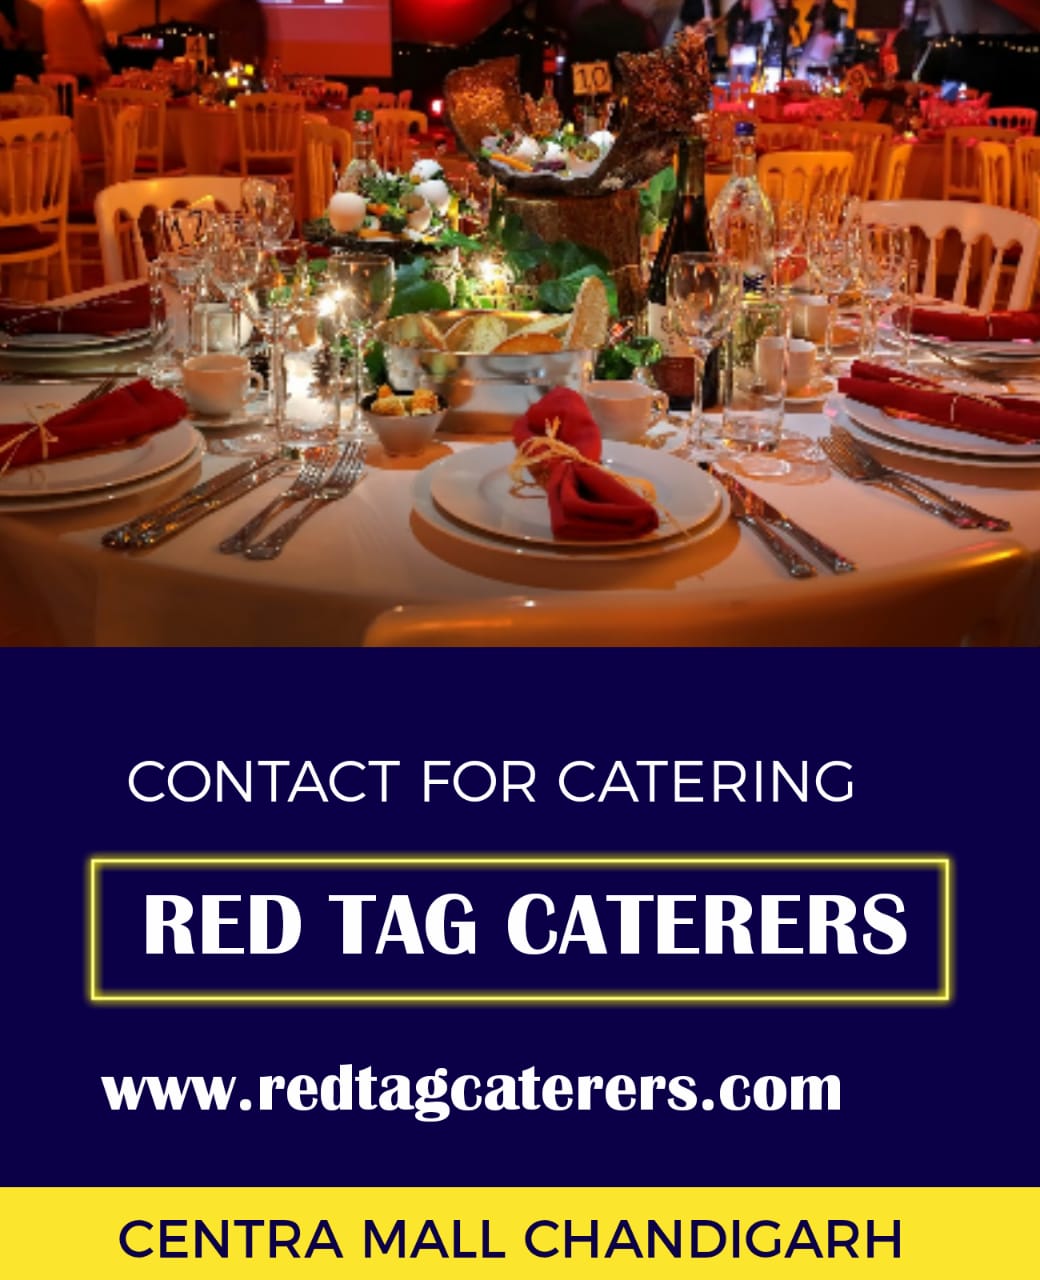 best wedding decoration and event planning catering services in zirakpur Mohali punjab...  | Red Tag Caterers | best wedding  catering services in zirakpur Mohali punjab, best decoration catering services in zirakpur Mohali punjab,best event planning catering services in zirakpur Mohali punjab, best Ranga cater - GL46438